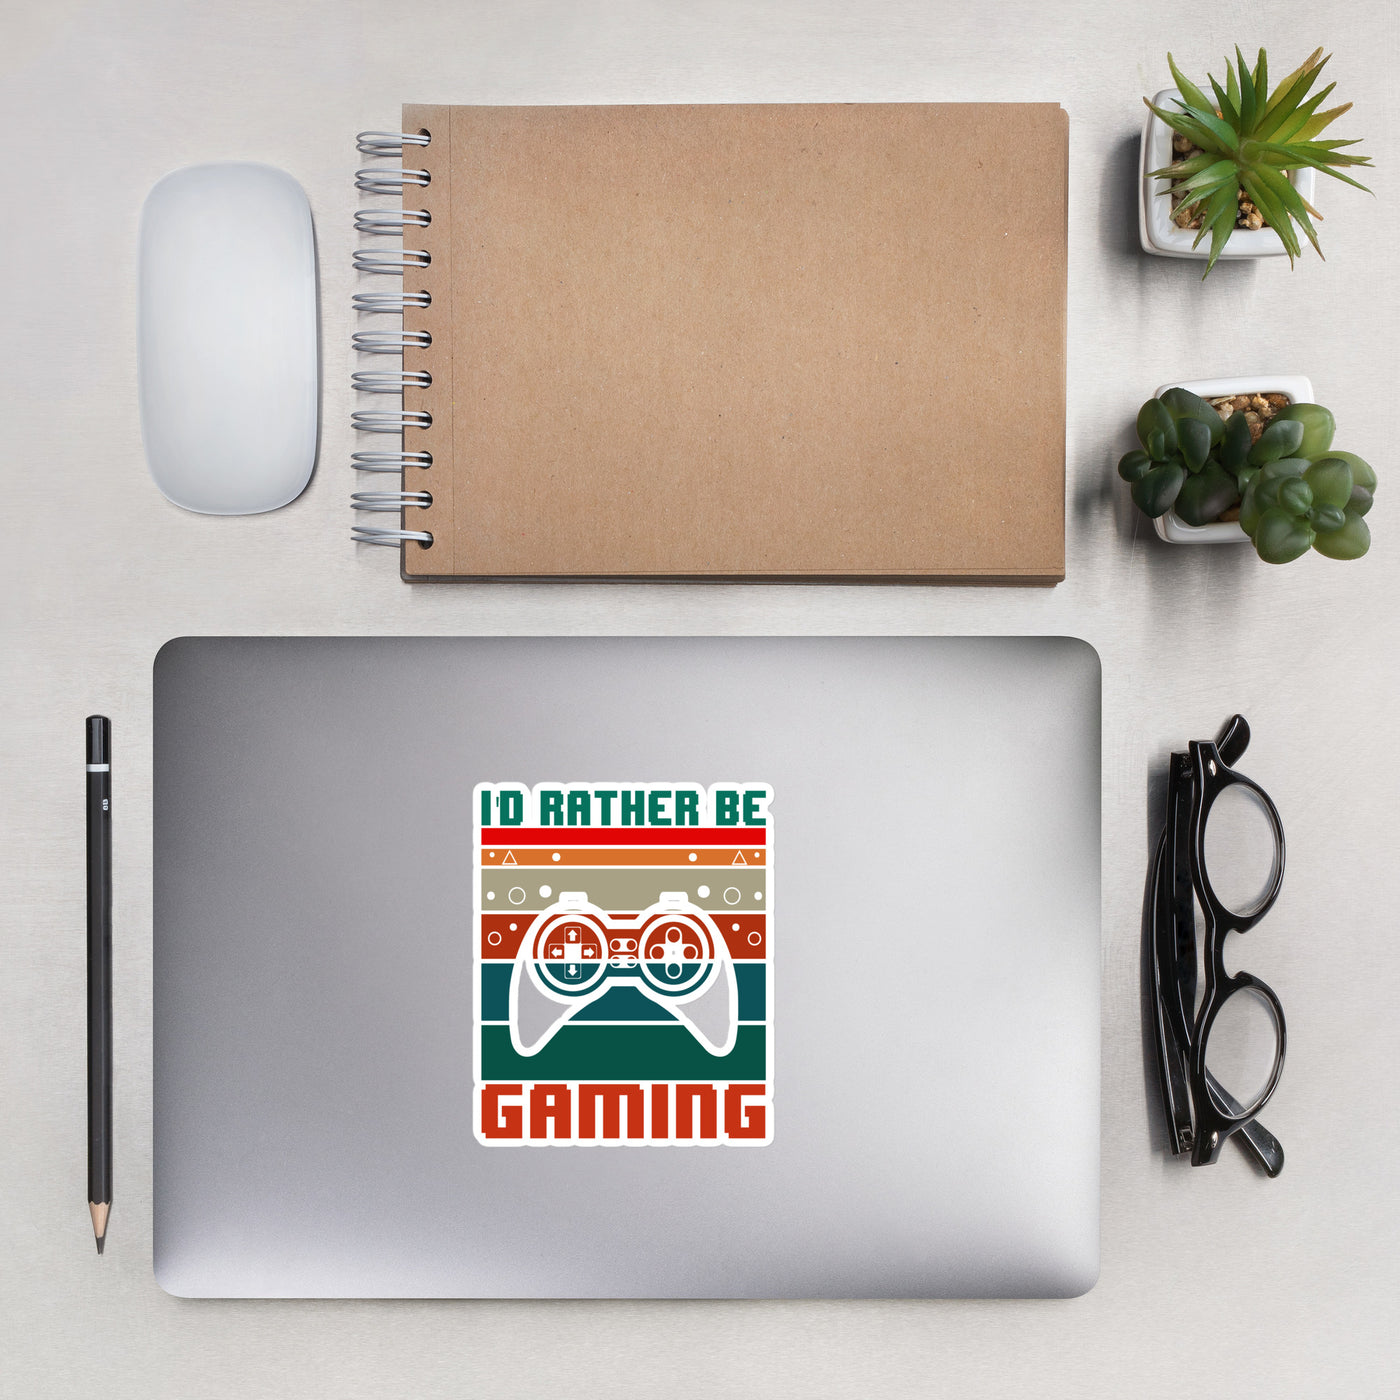 I'd rather be Gaming - Bubble-free stickers